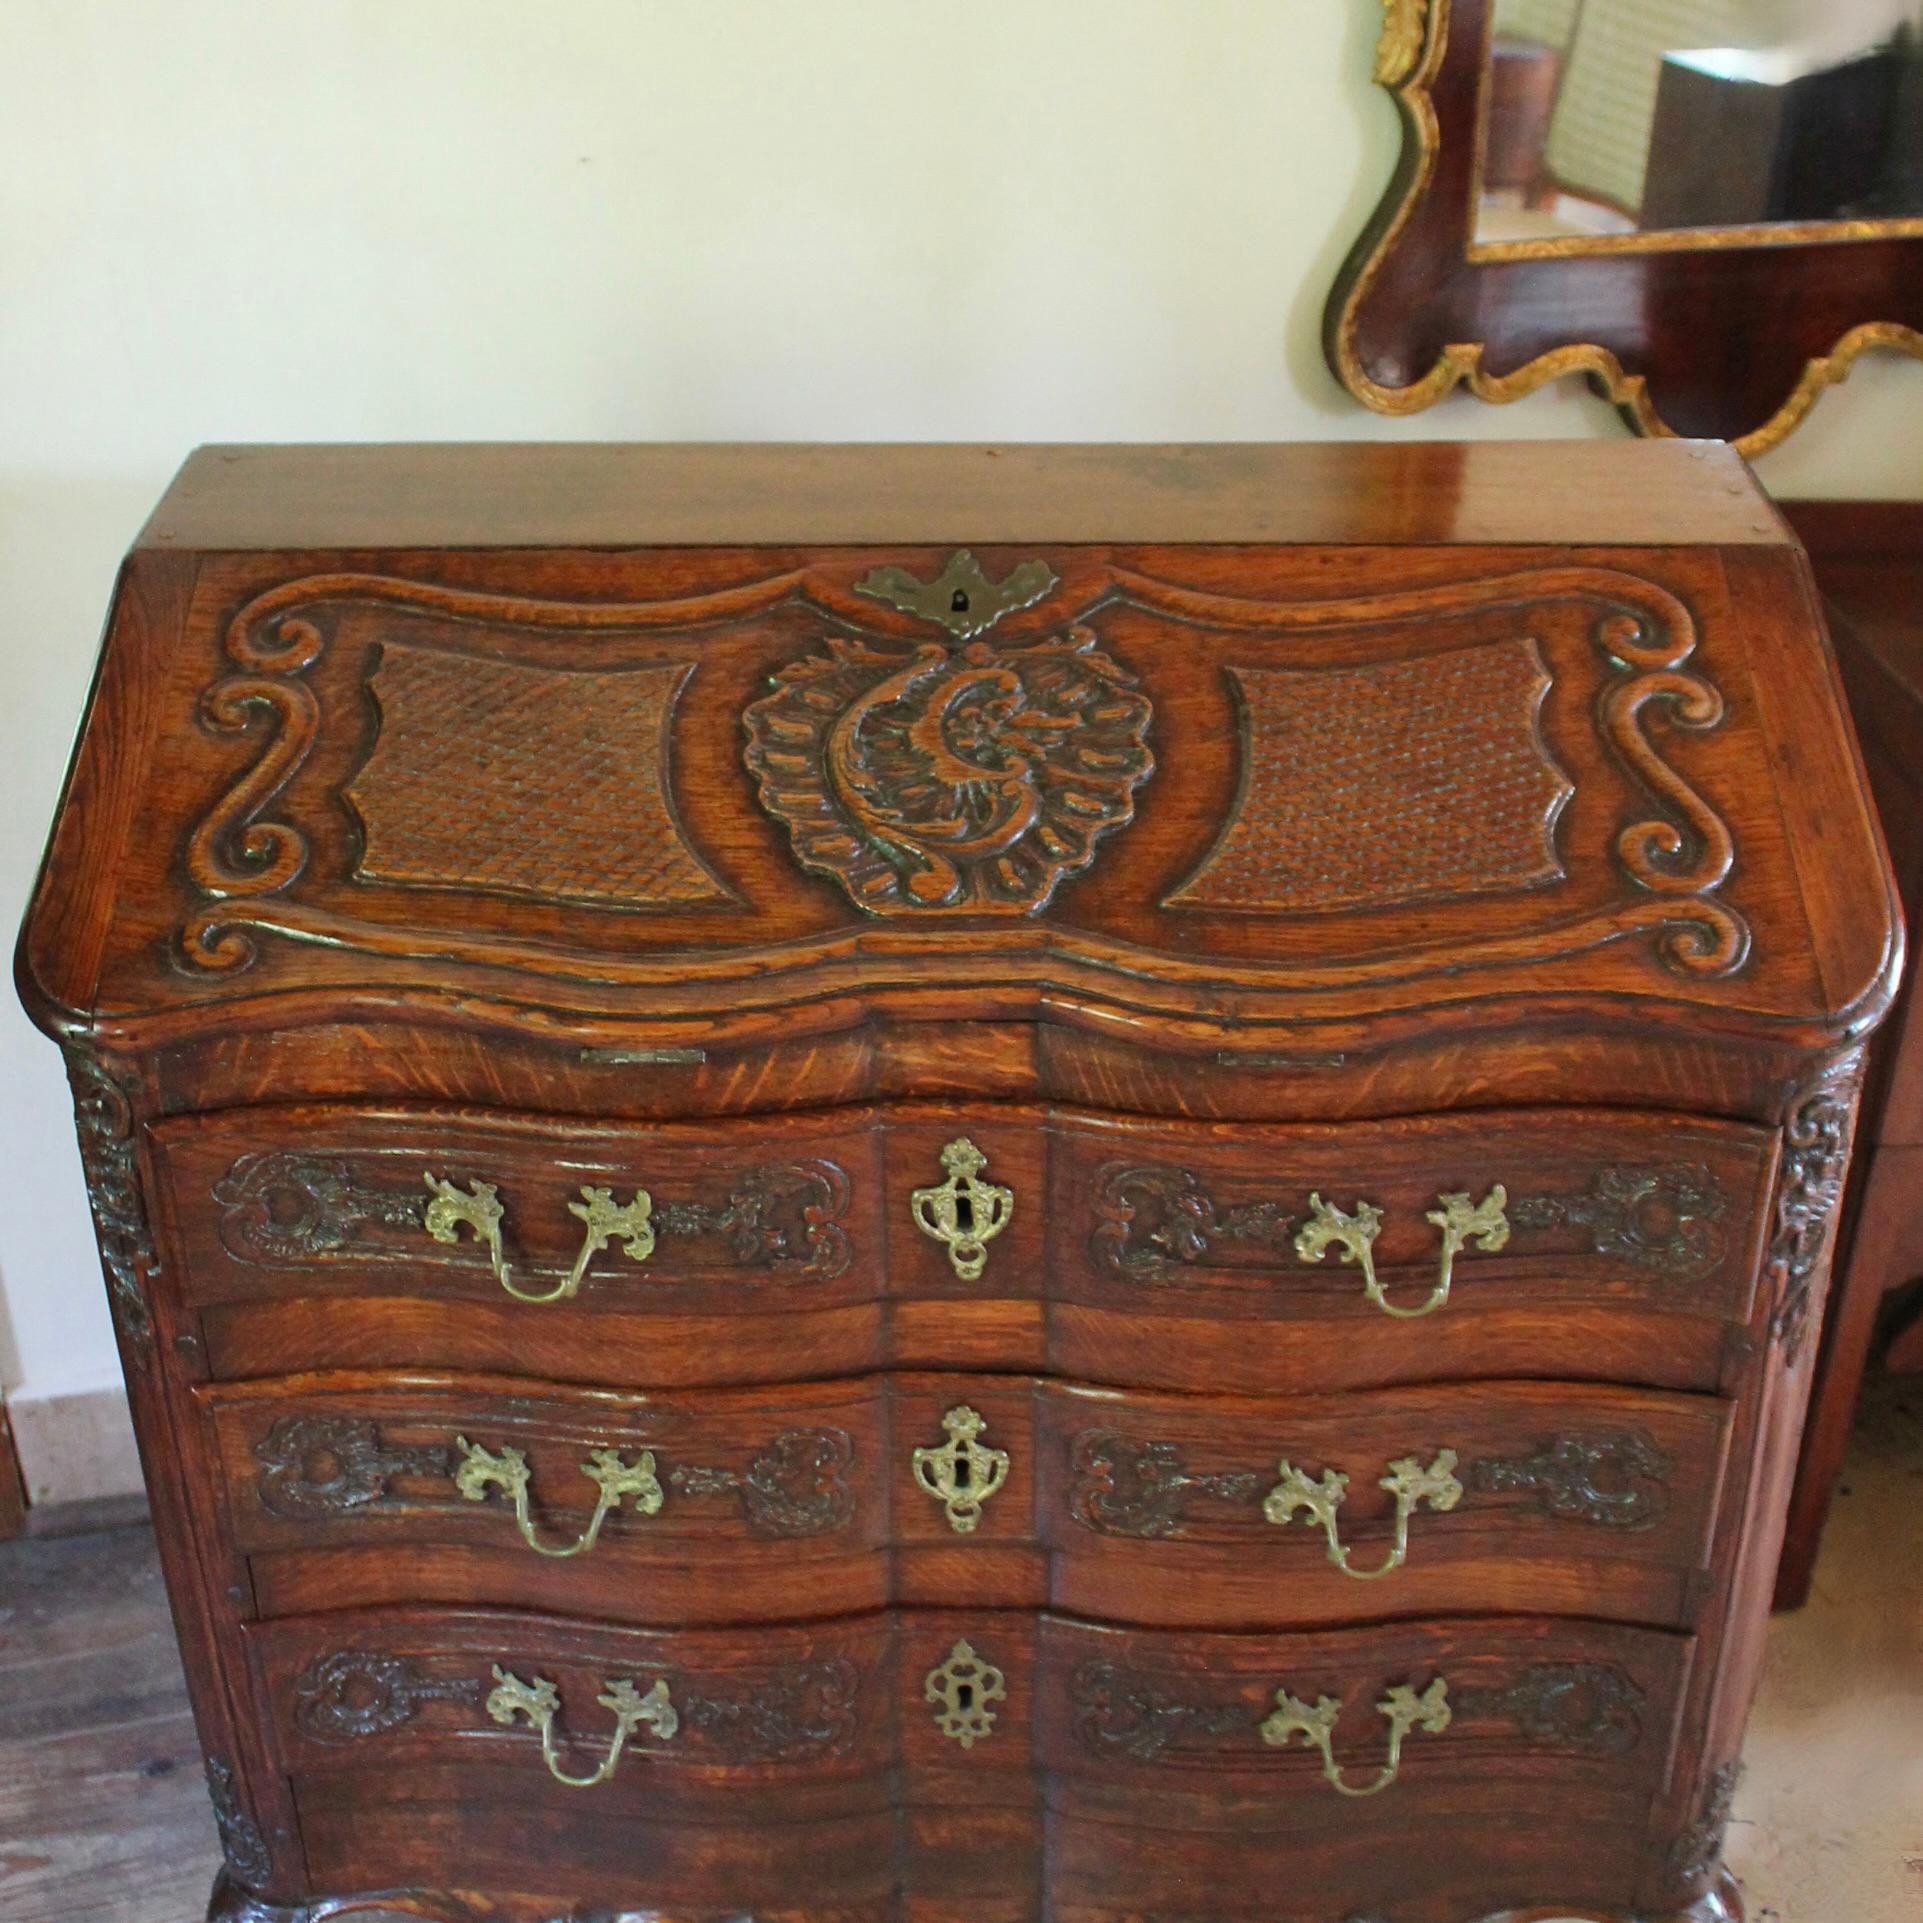 Dutch Continental Régence Inspired Commode With Rococo Carved Desk Top For Sale